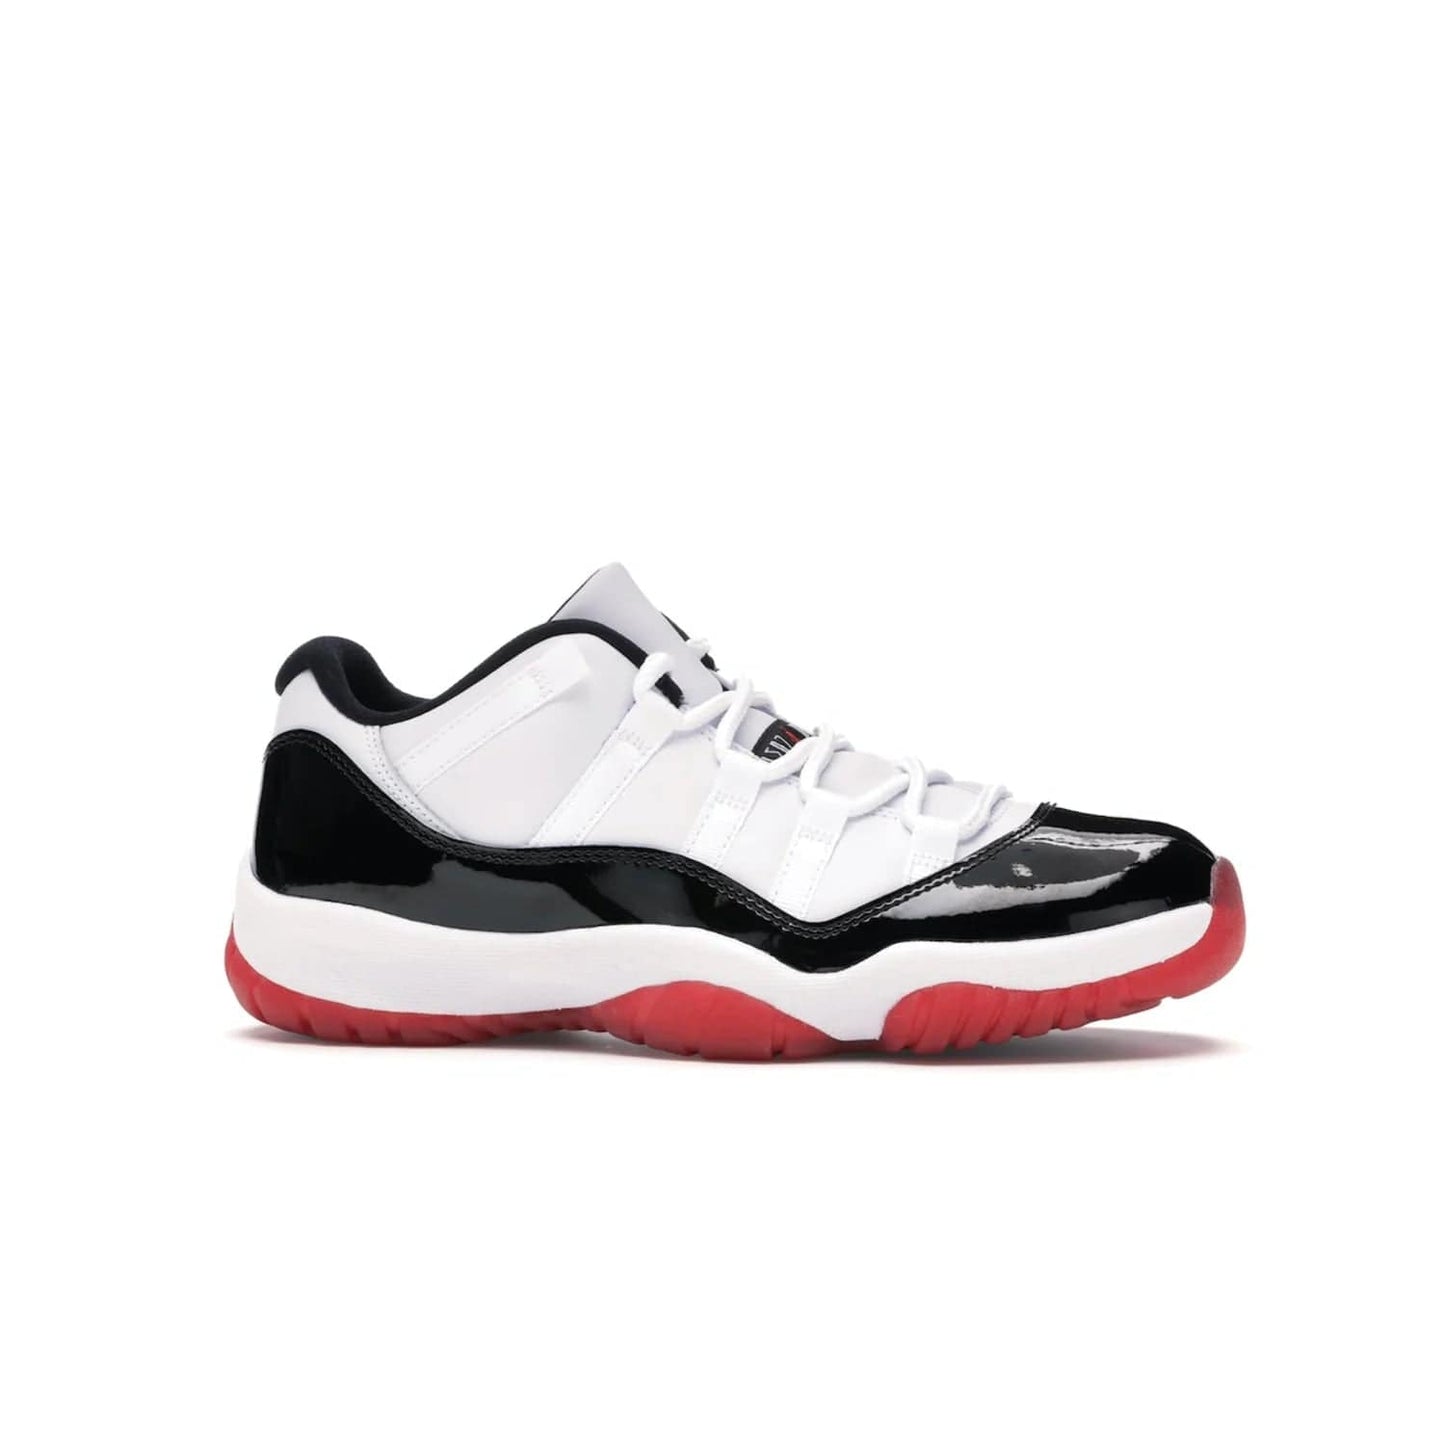 Jordan 11 Retro Low Concord Bred - Image 2 - Only at www.BallersClubKickz.com - Grab the classic Jordan 11 look with the Jordan 11 Retro Low Concord Bred. With white and black elements and the iconic red outsole of the Jordan 11 Bred, you won't miss a beat. Released in June 2020, the perfect complement to any outfit.